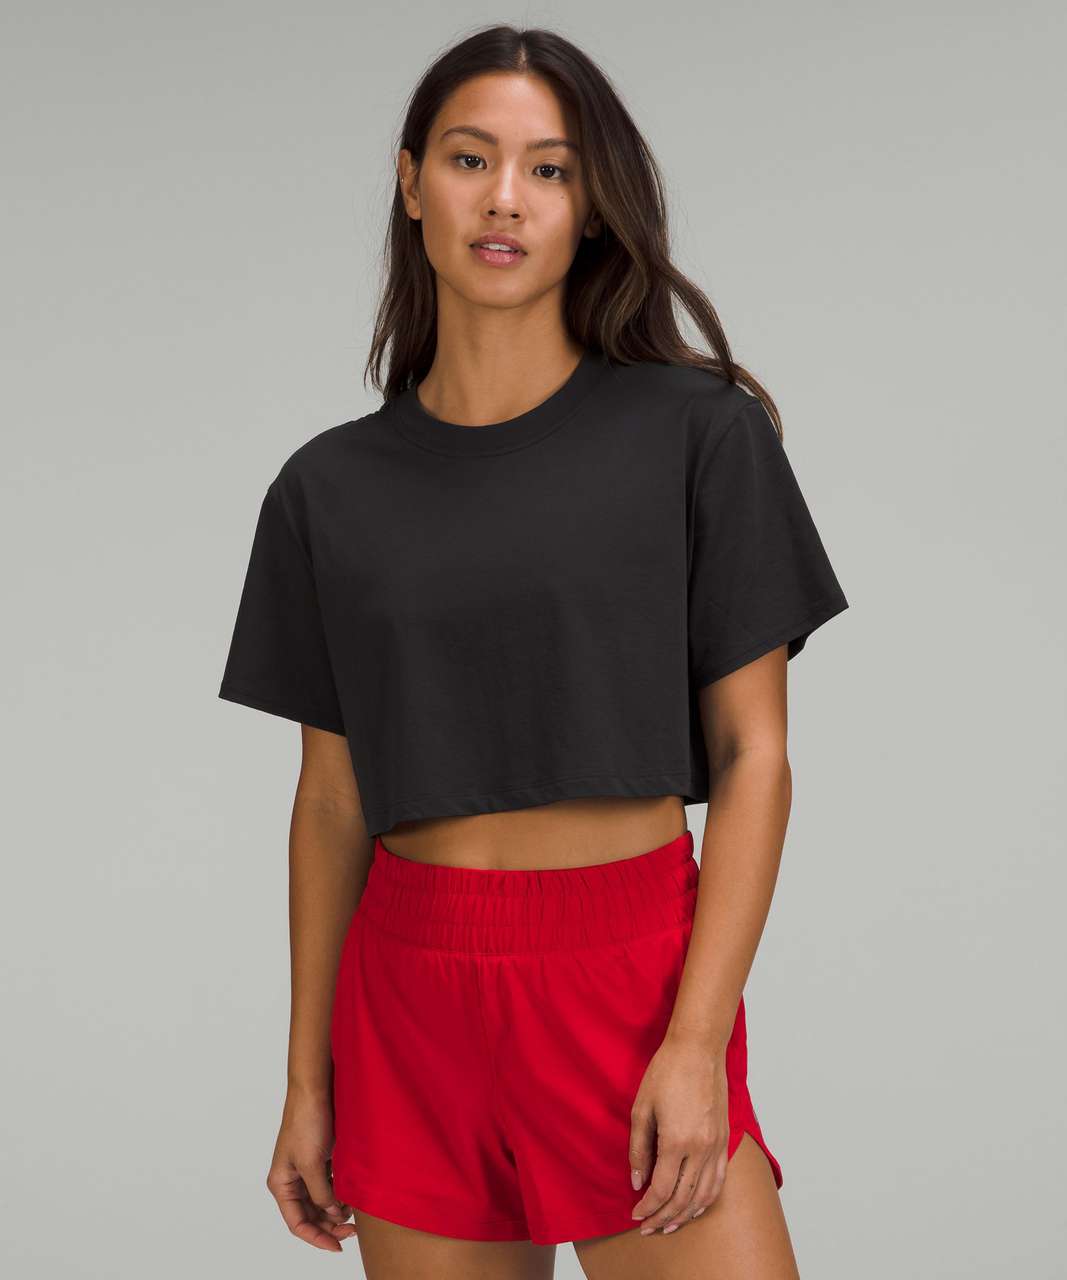 Lululemon All Yours Cropped T-Shirt - Black